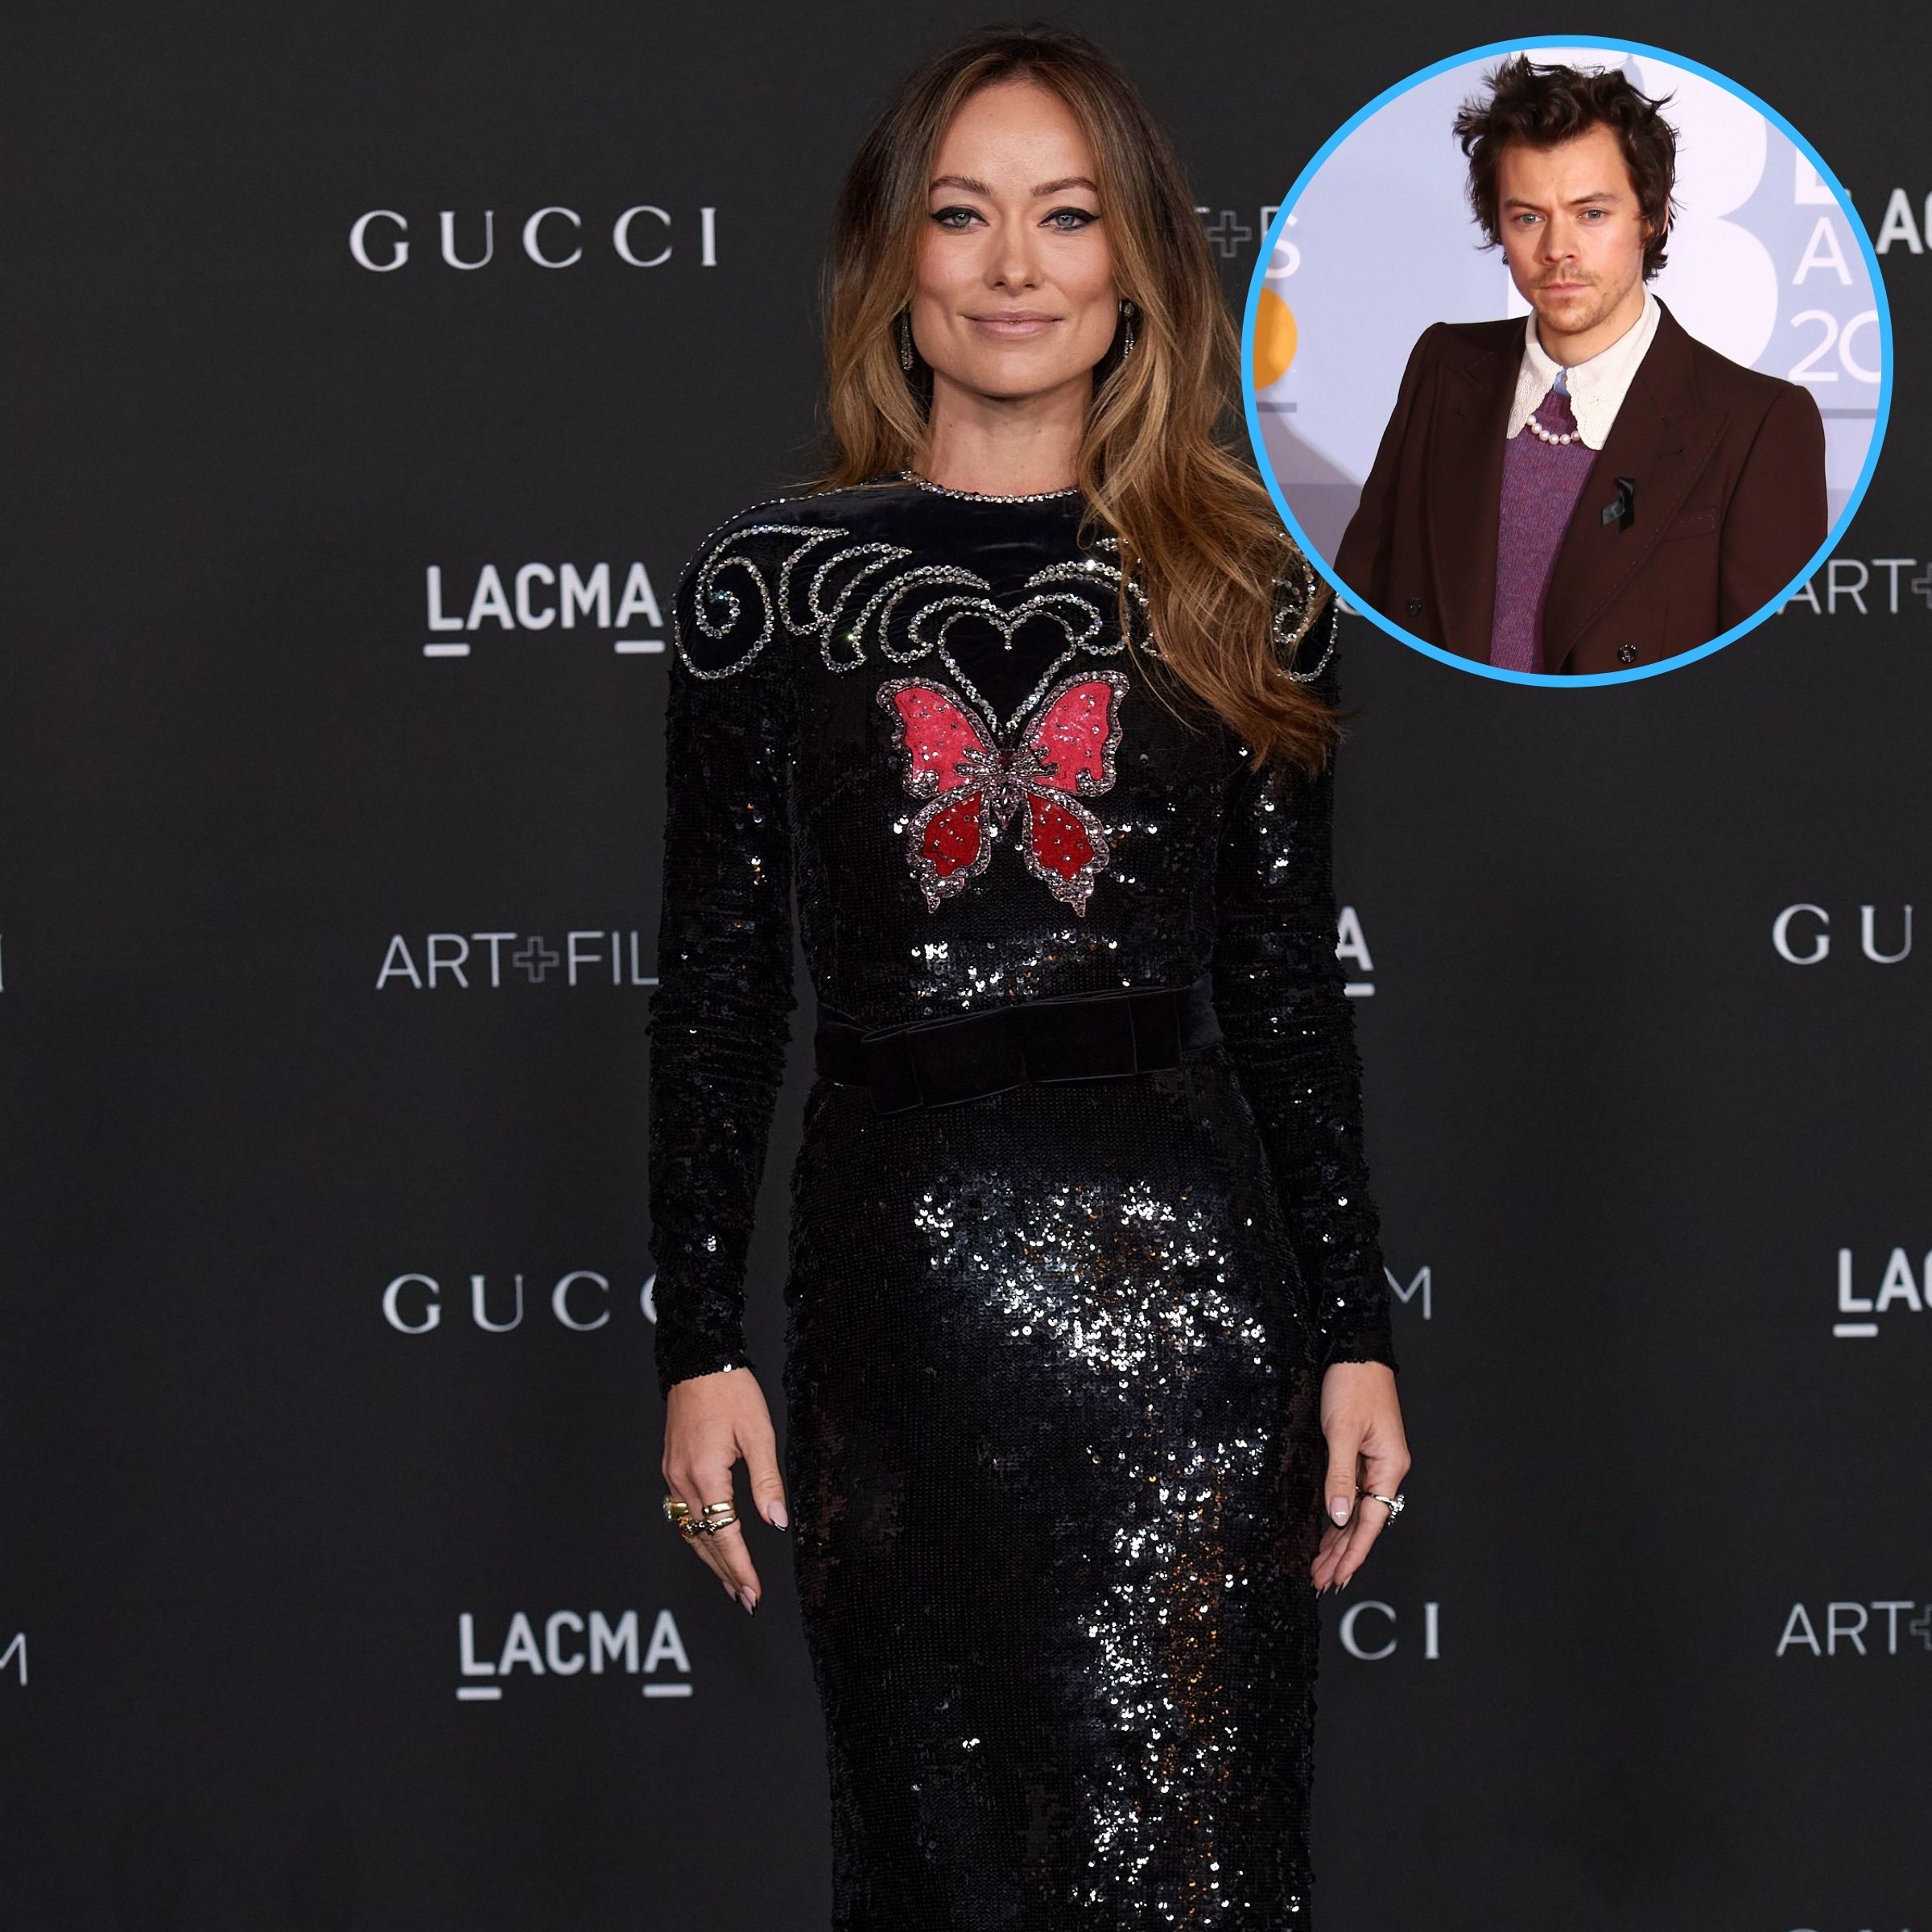 https://www.intouchweekly.com/wp-content/uploads/2022/04/OLIVIA-WILDE-SUPPORTS-HARRY-STYLES-COACHELLA-IT.jpg?quality=86&strip=all